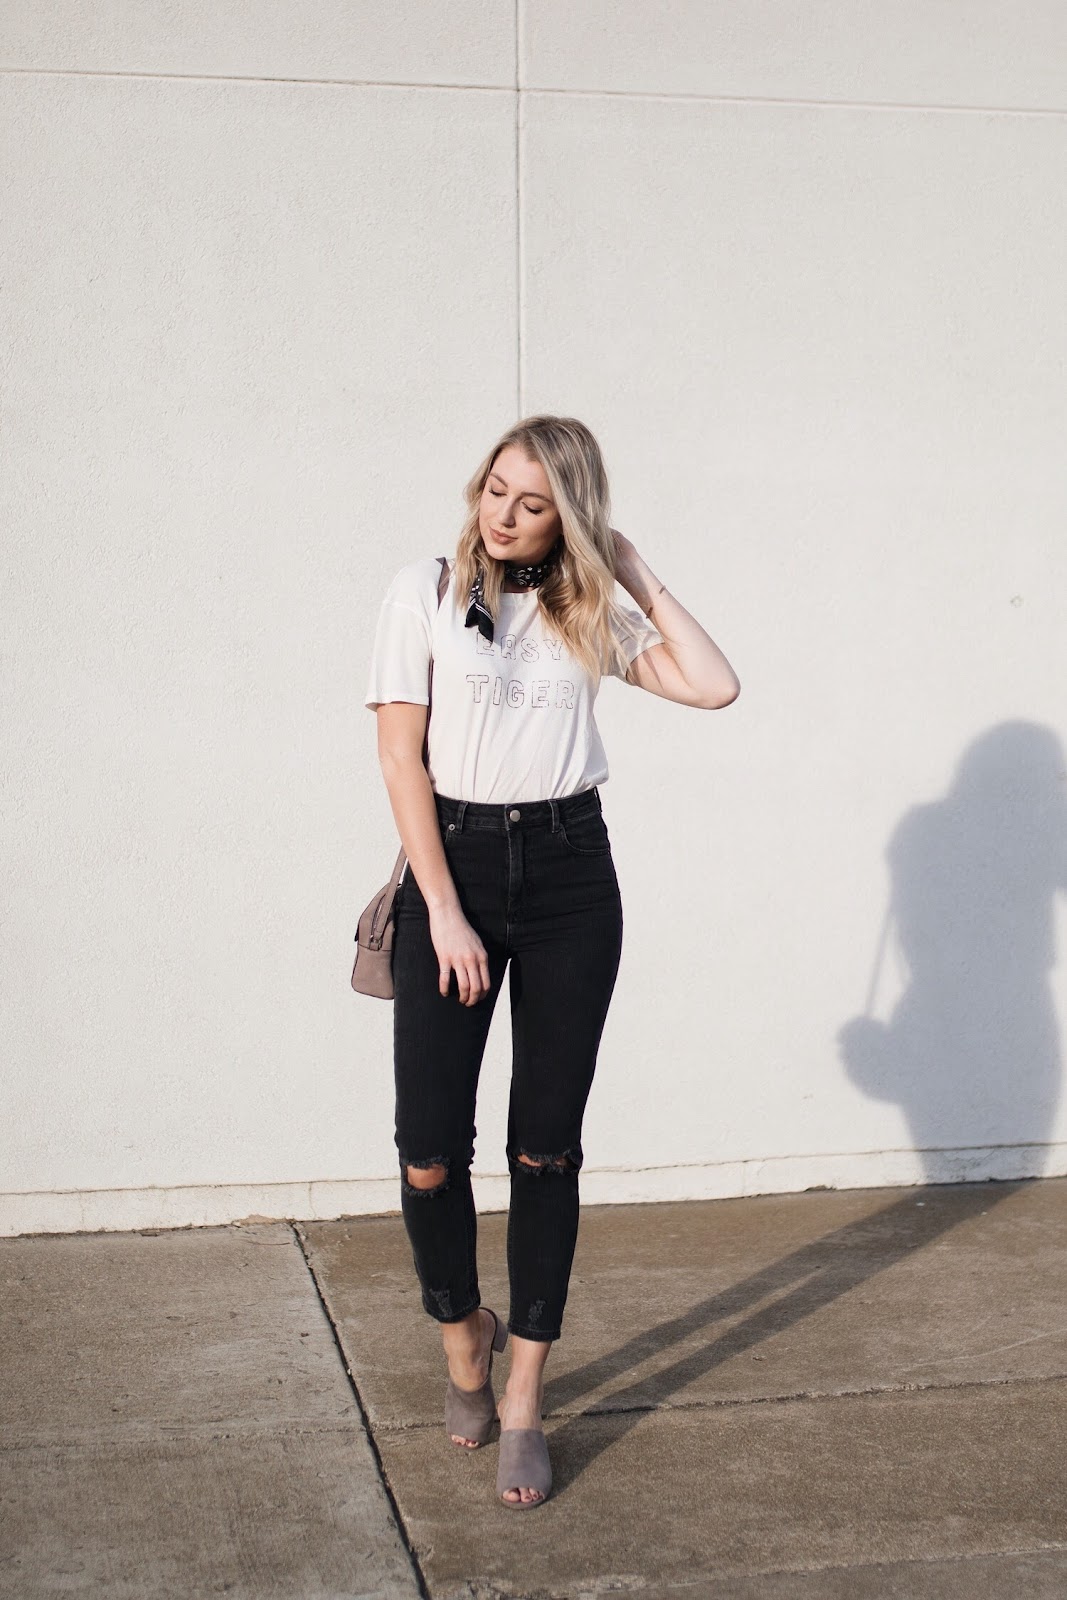 high-waisted "mom" jeans, graphic tee, heeled mules